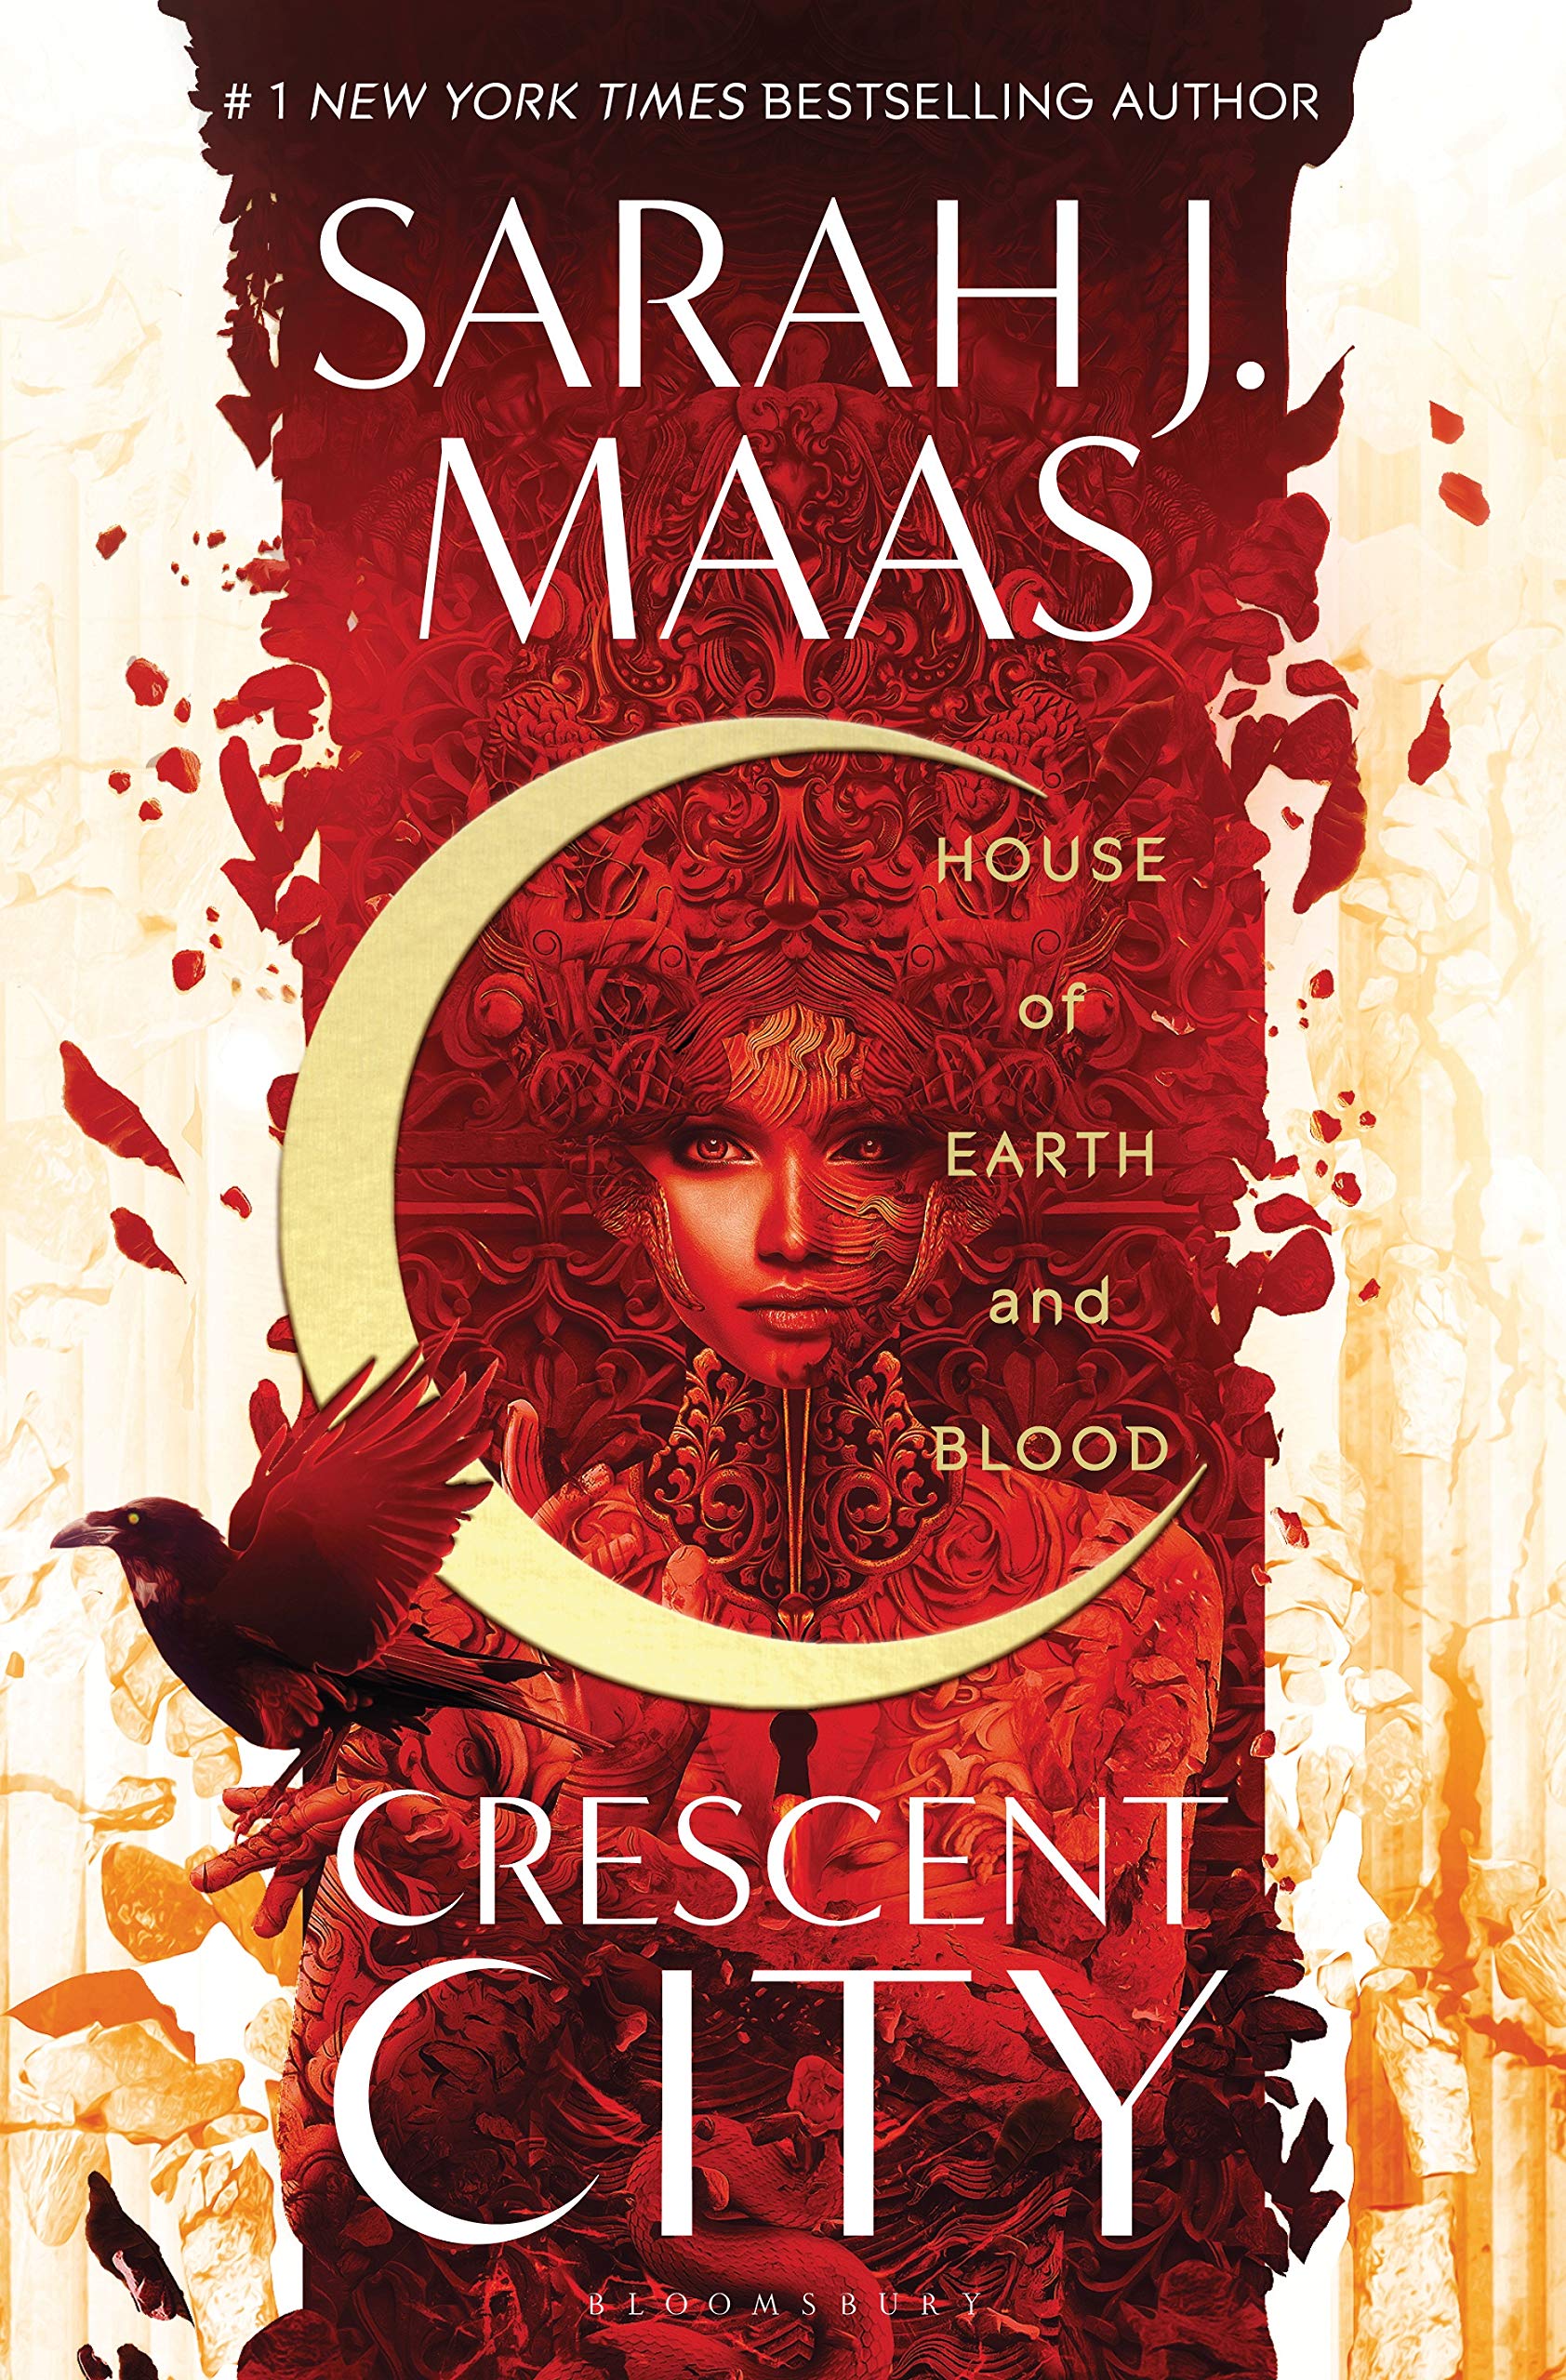 REVIEW 'Crescent City House of Earth and Blood' by Sarah J. Maas